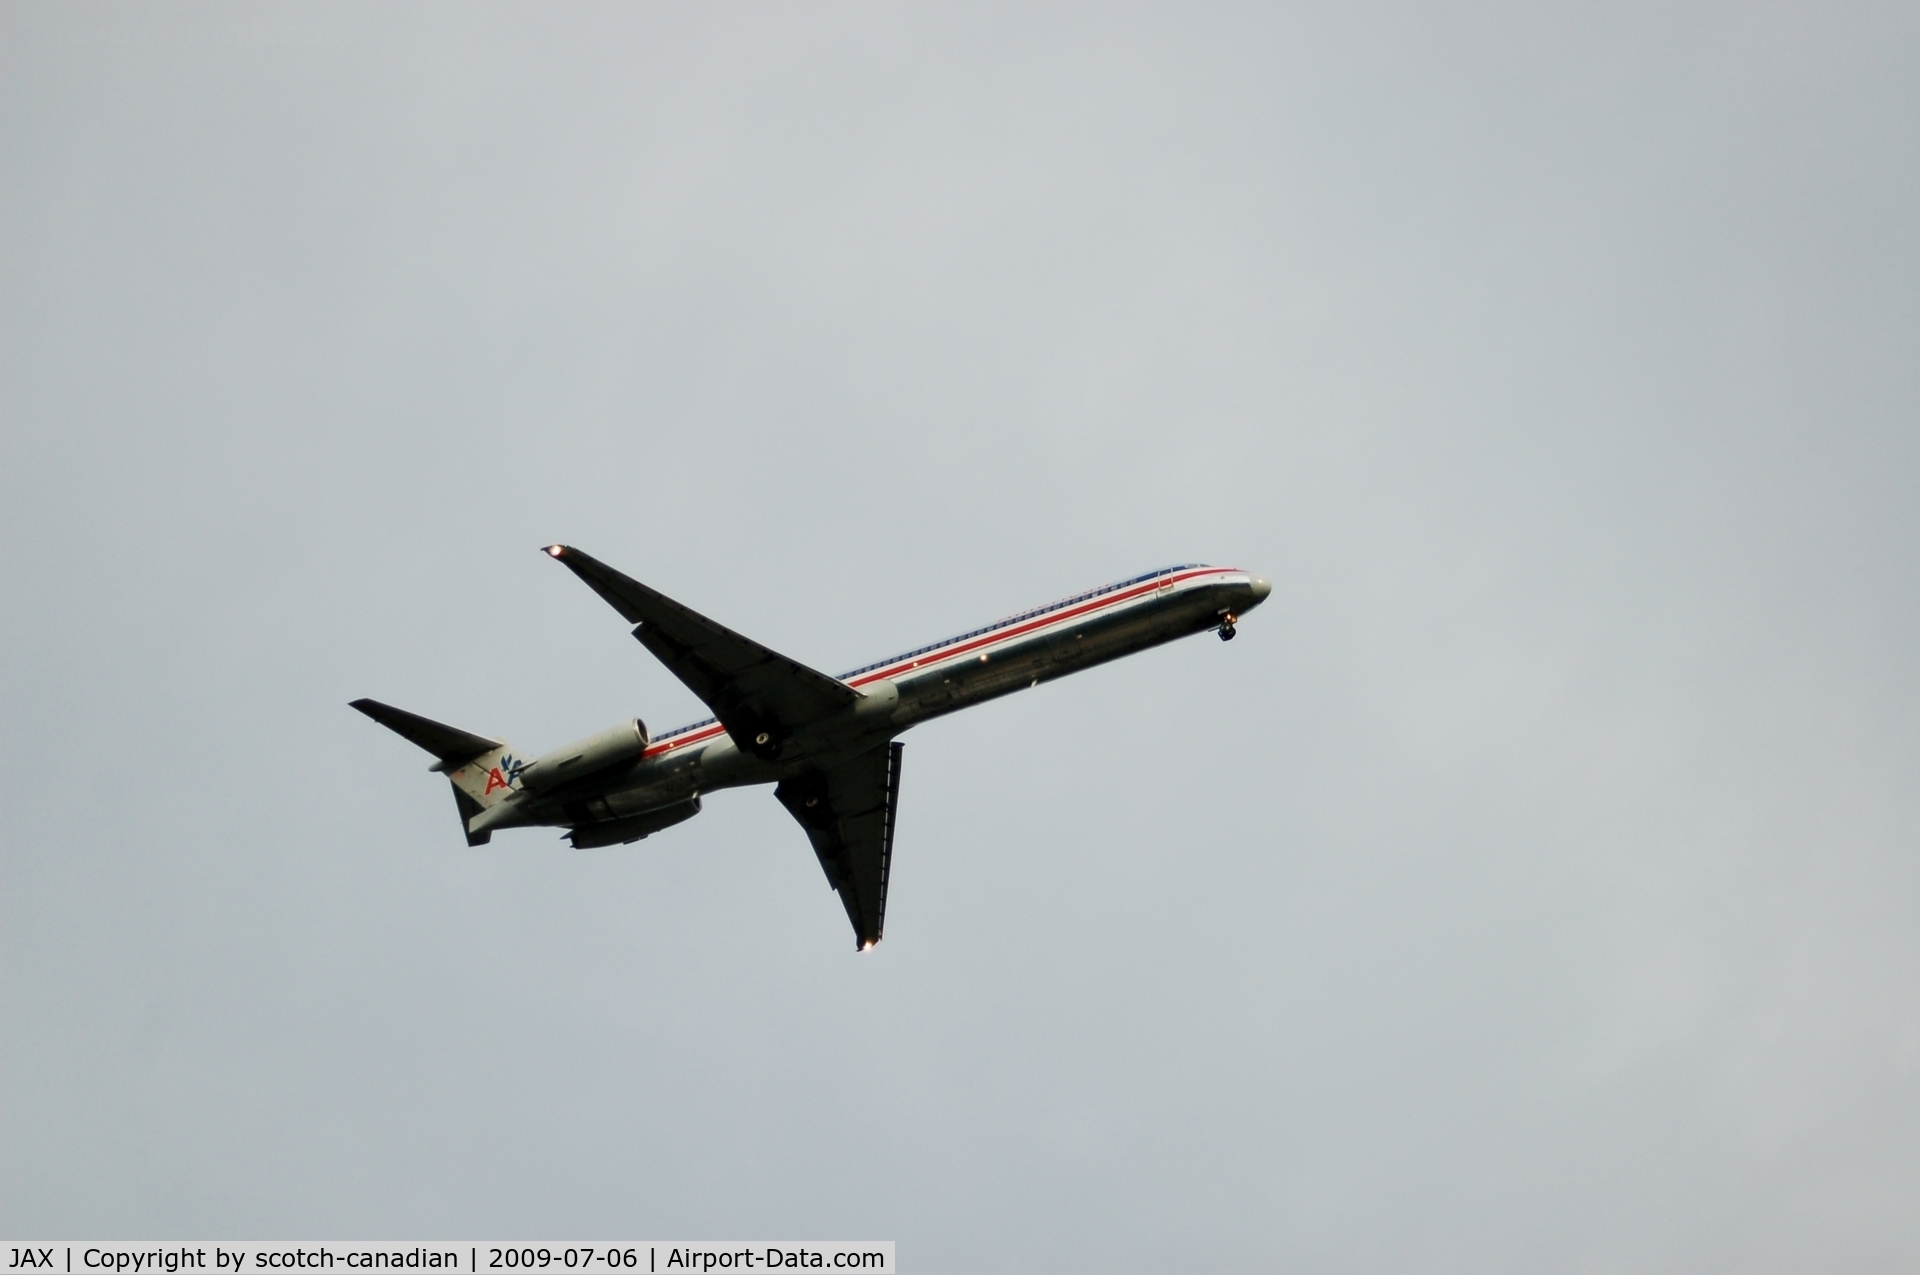 Jacksonville International Airport (JAX) - American Airlines Jet on Final Approach to Jacksonville International Airport, Jacksonville, FL